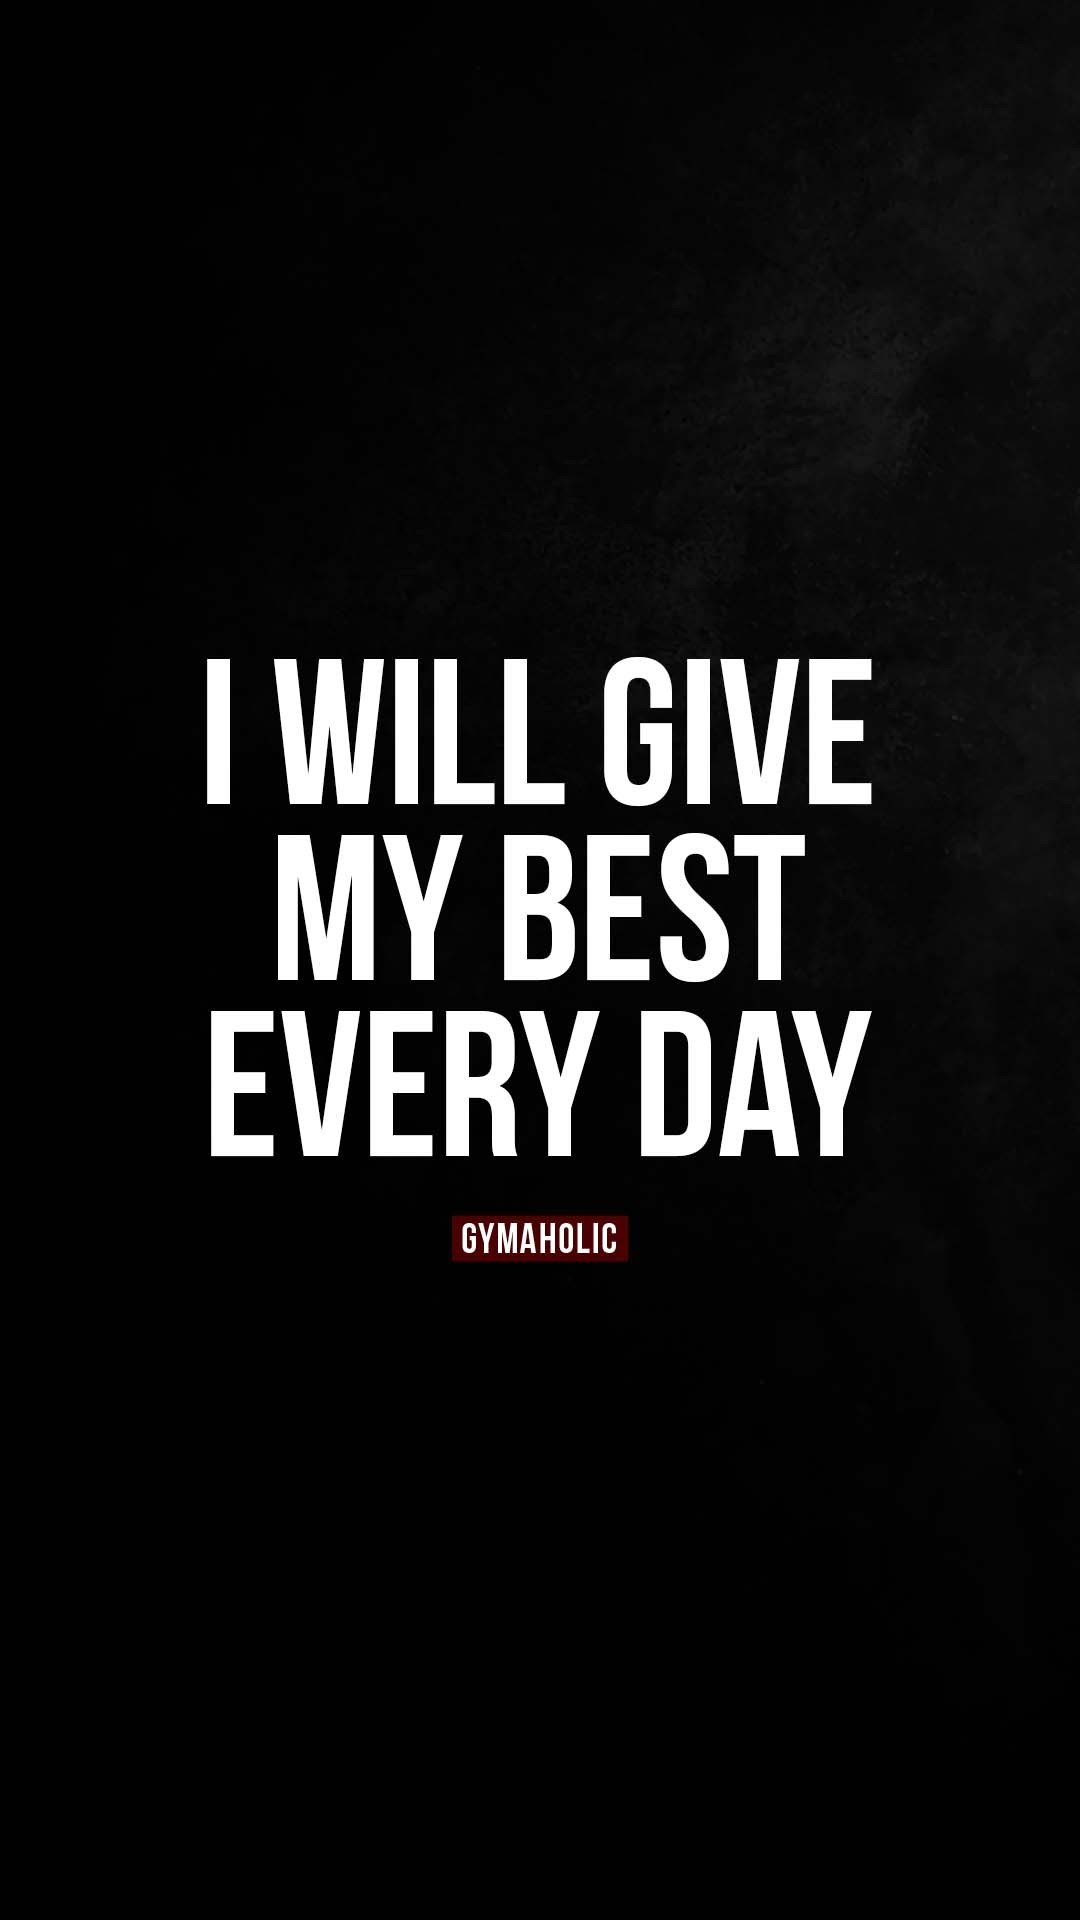 I will give my best every day